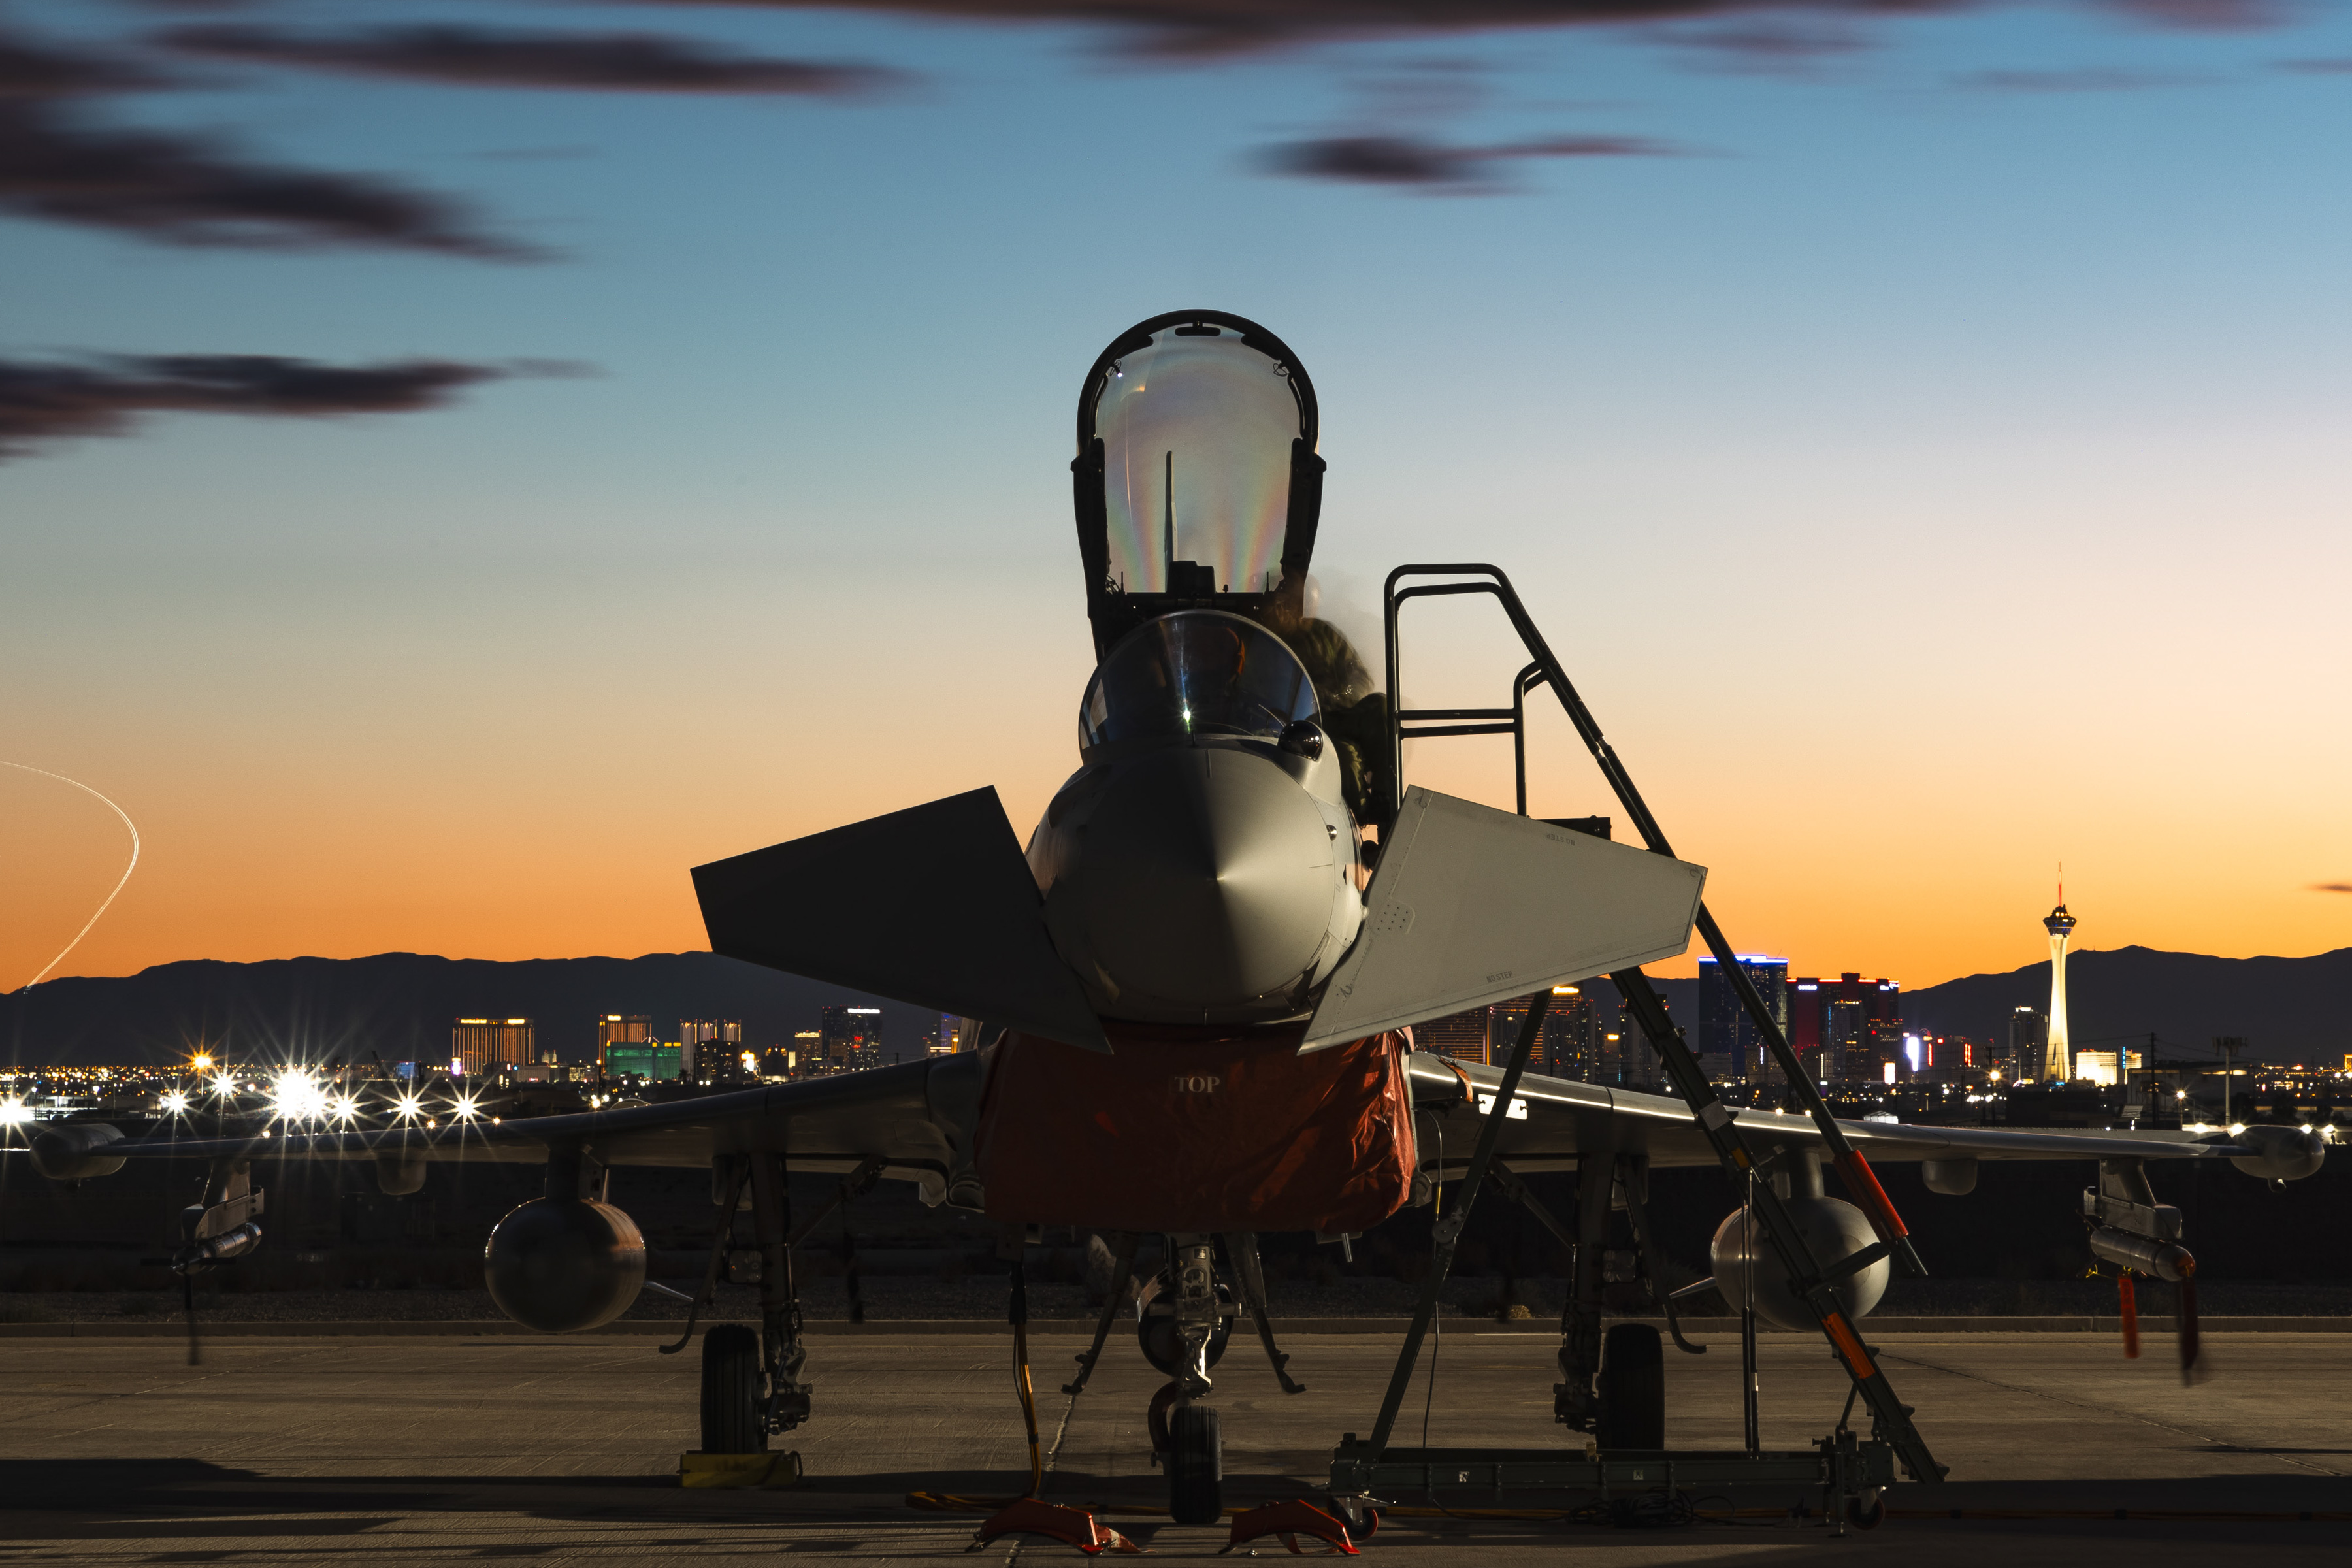 Aircraft from the front with sunset in the background